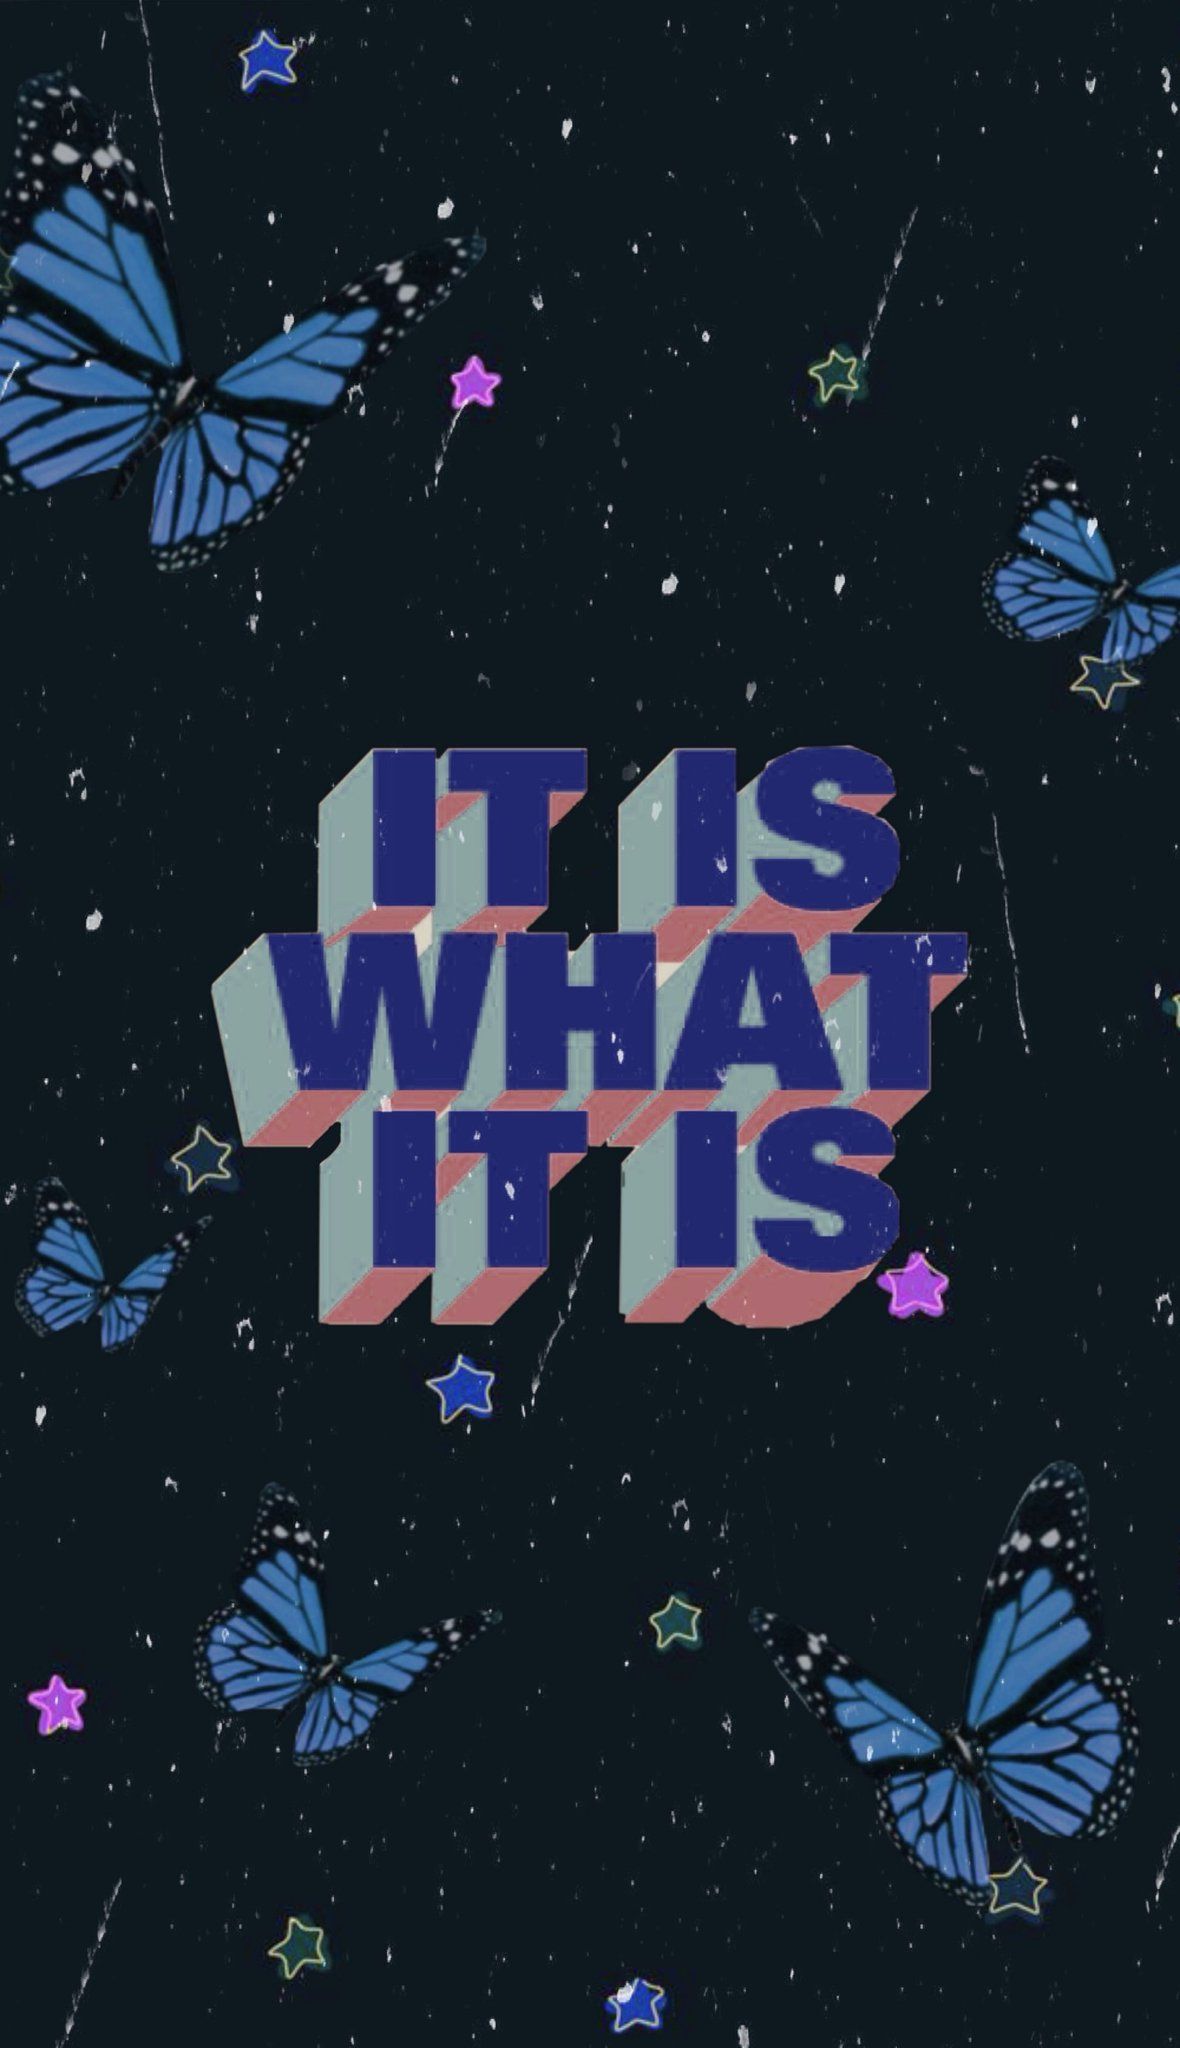 Aesthetic wallpaper for phone with butterfly, stars and the words 